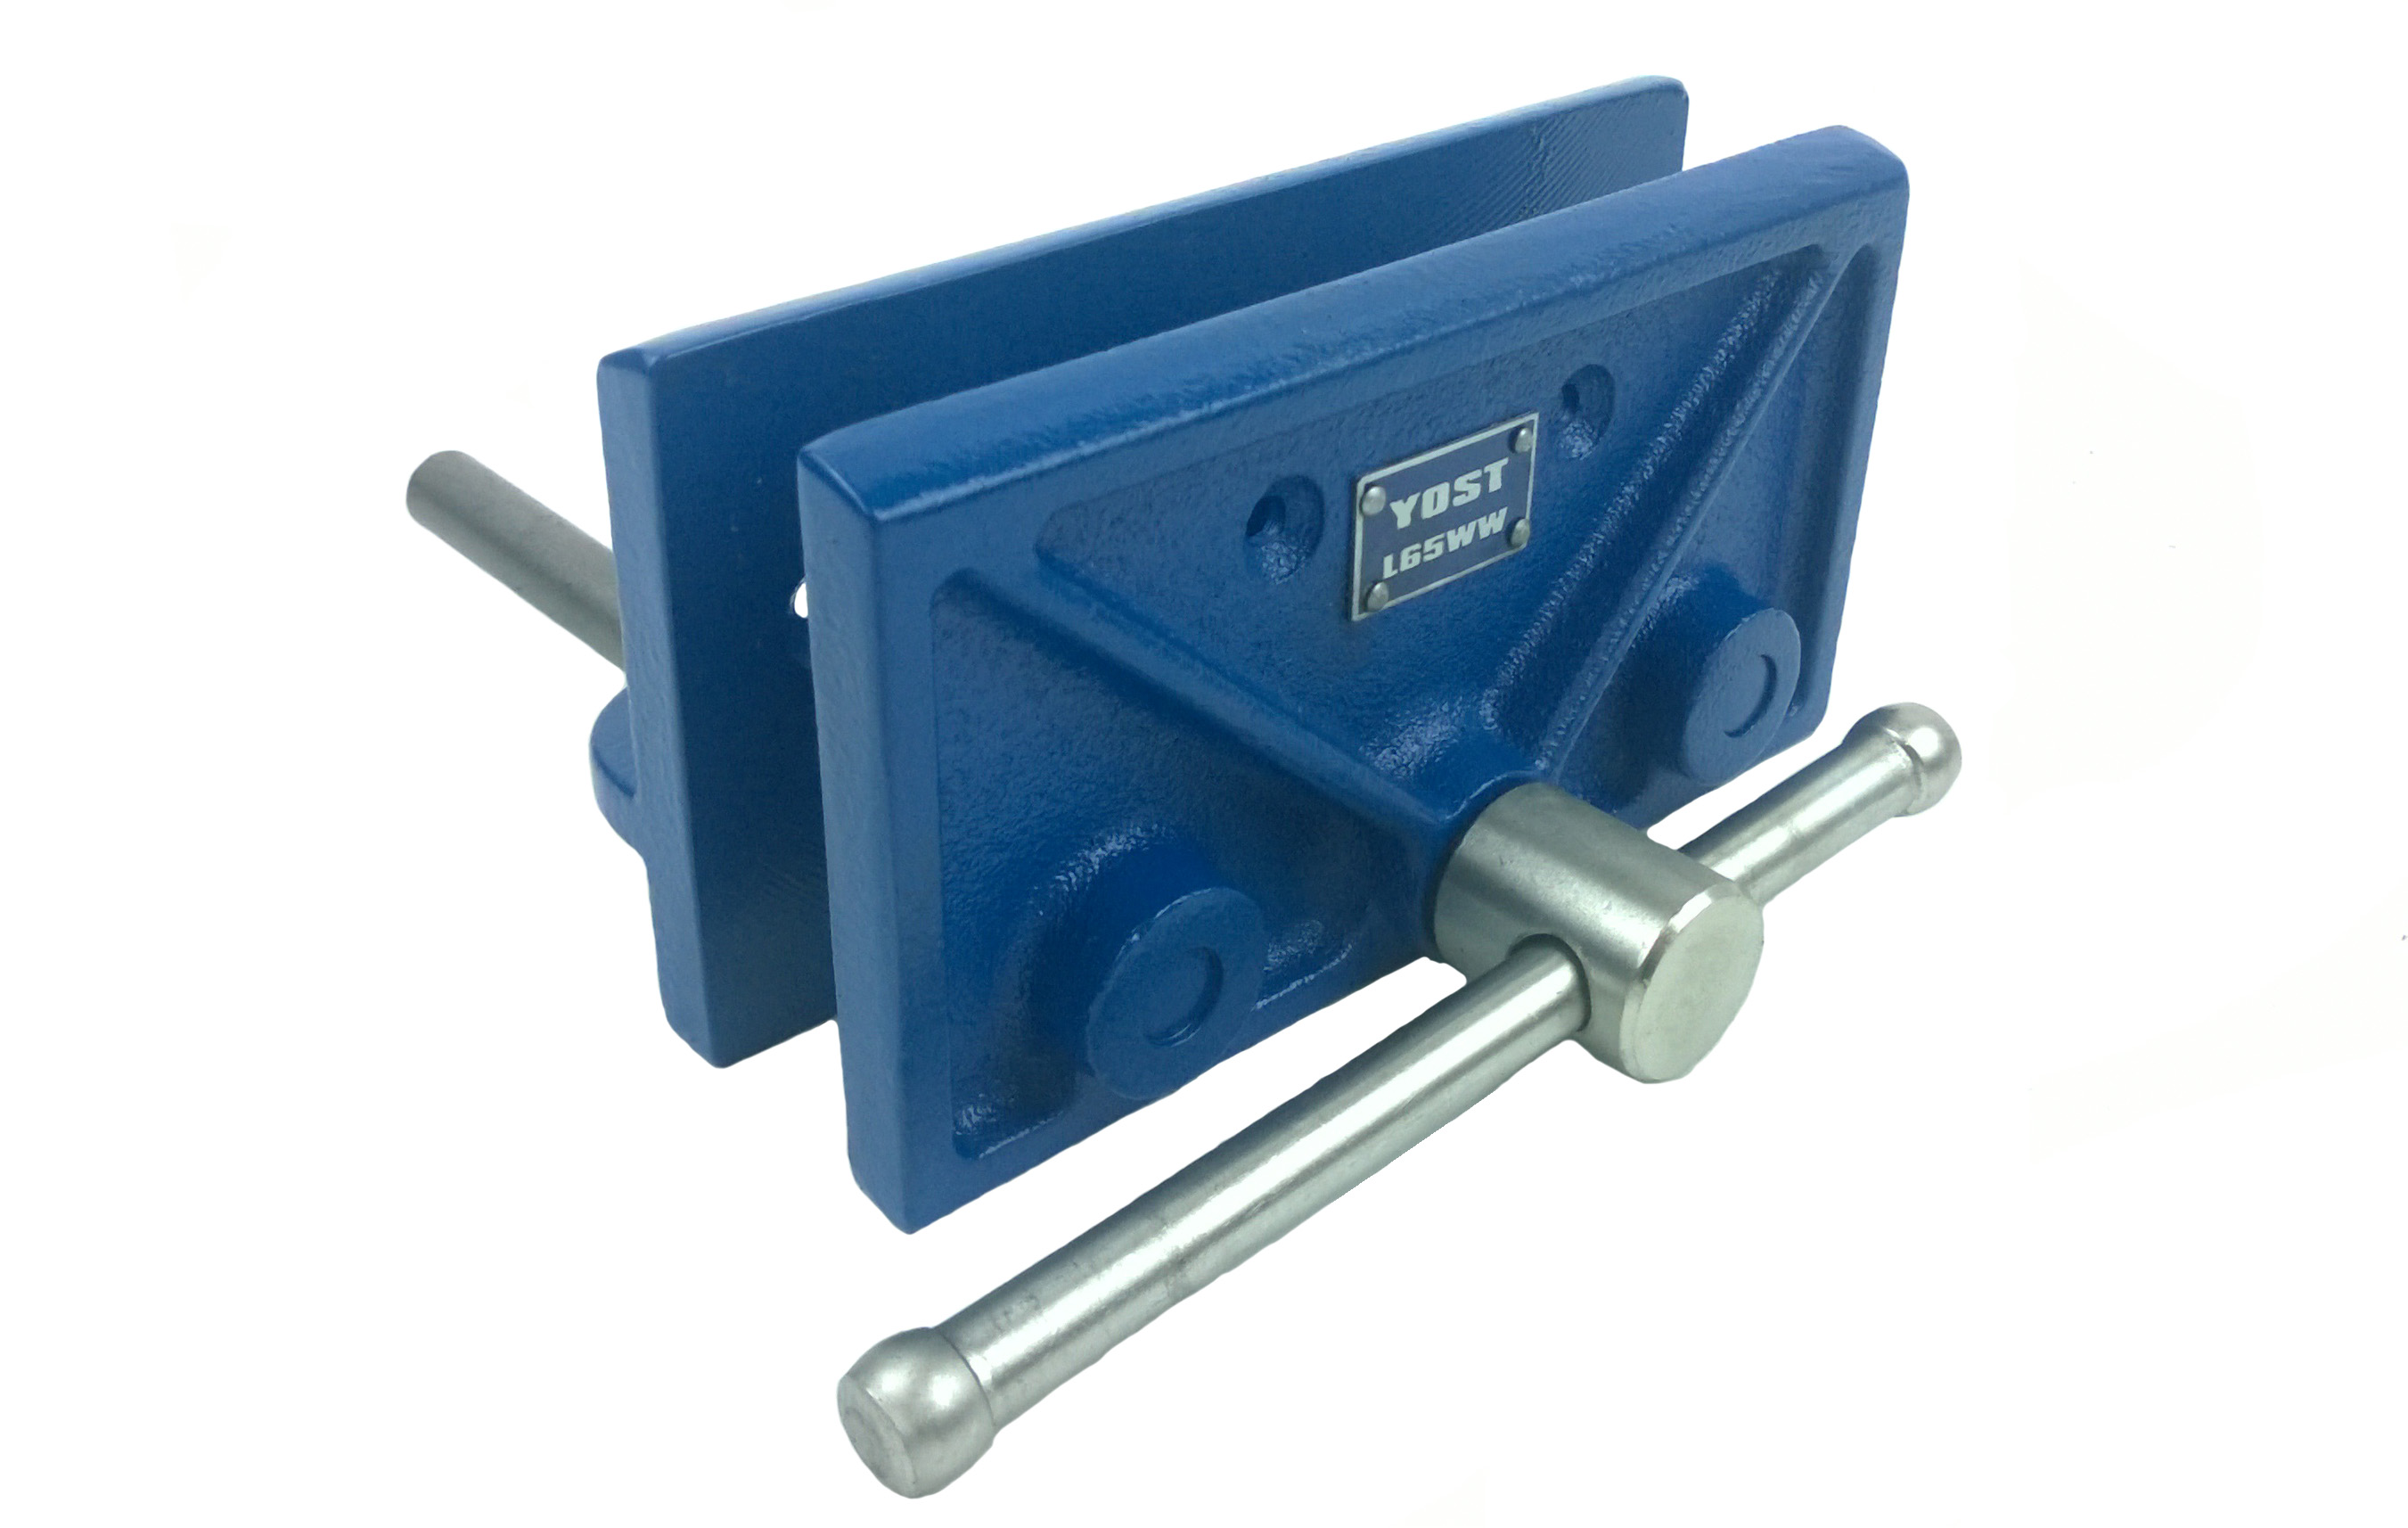 Yost Hobby Woodworking Vise | Shop Your Way: Online 